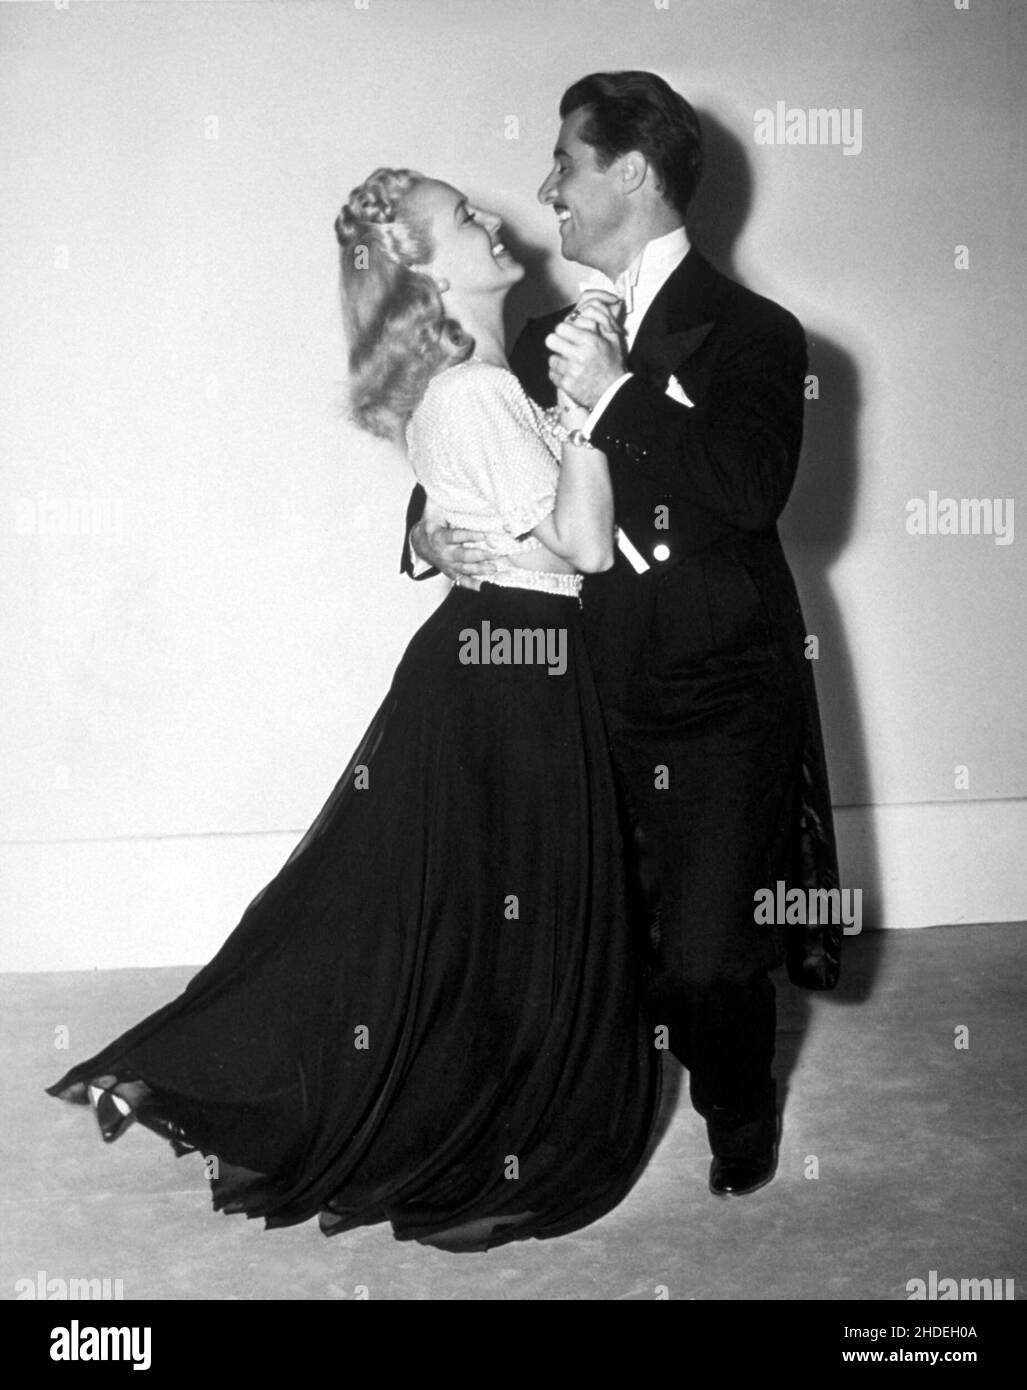 DON AMECHE and BETTY GRABLE in DOWN ARGENTINE WAY (1940), directed by IRVING CUMMINGS. Credit: 20TH CENTURY FOX / Album Stock Photo